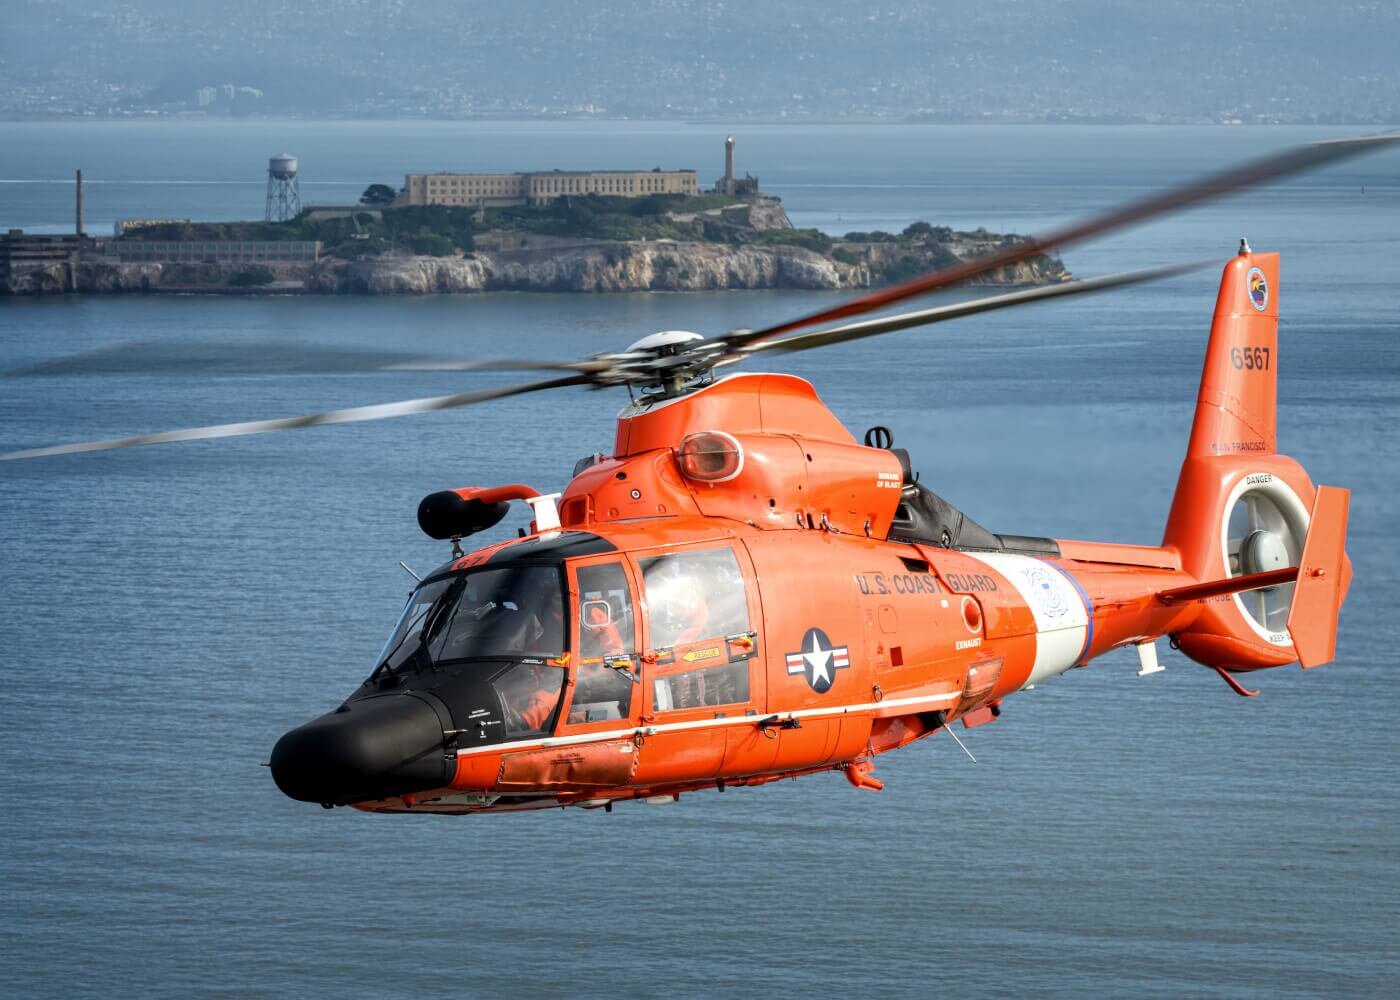 Turbine ris rolle Only Hope: Behind the scenes at U.S. Coast Guard Air Station San Francisco  - Vertical Mag